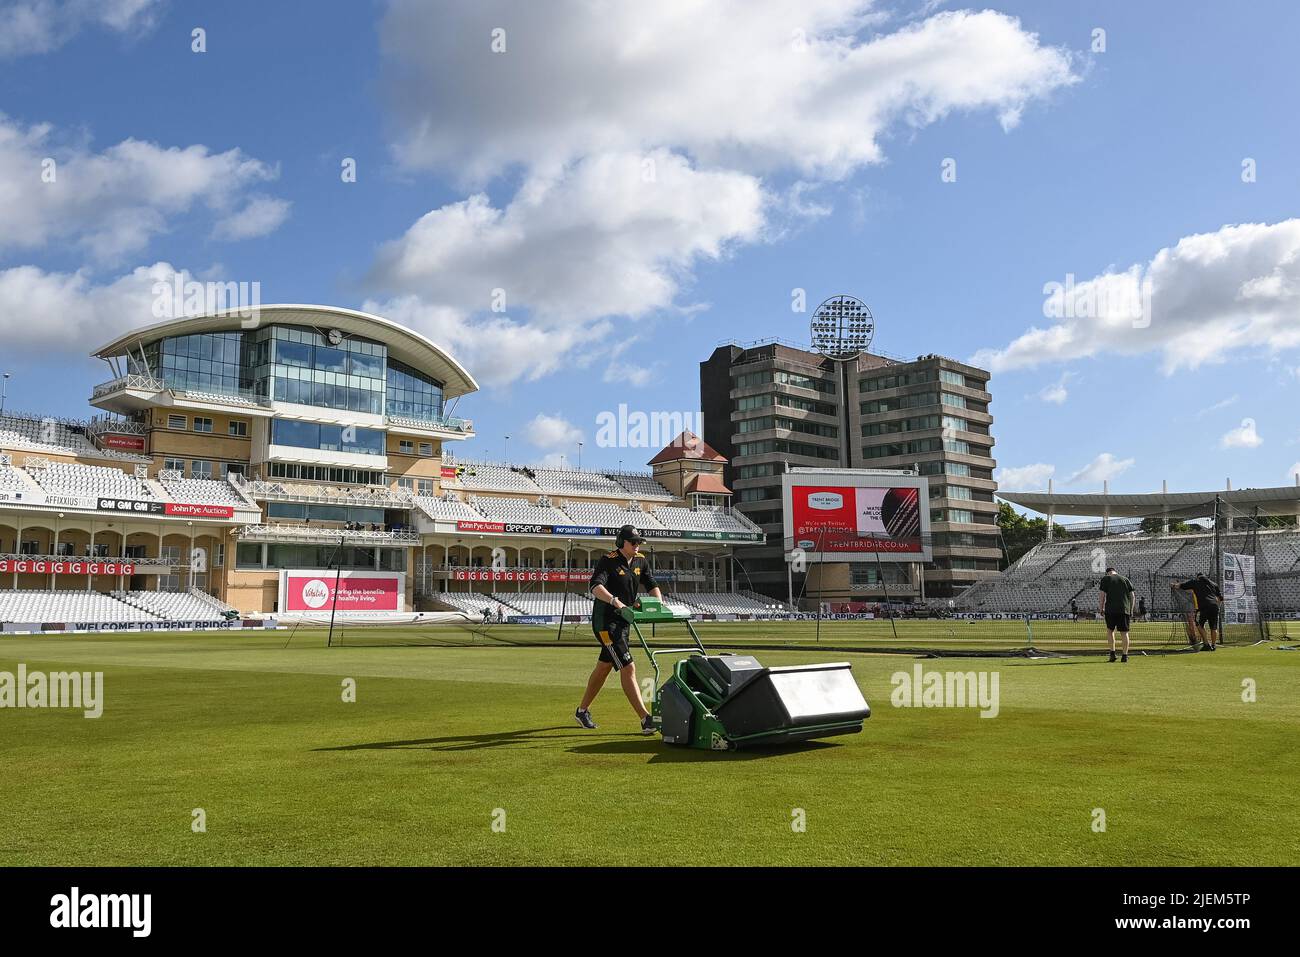 Ground staff at Trent Bridge prepare the pitch ahead of day 2 of the 2nd Test between the New Zealand Blackcaps and England at Trent Bridge Cricket Ground, Nottingham, England on Saturday 11 June 2022. Stock Photo